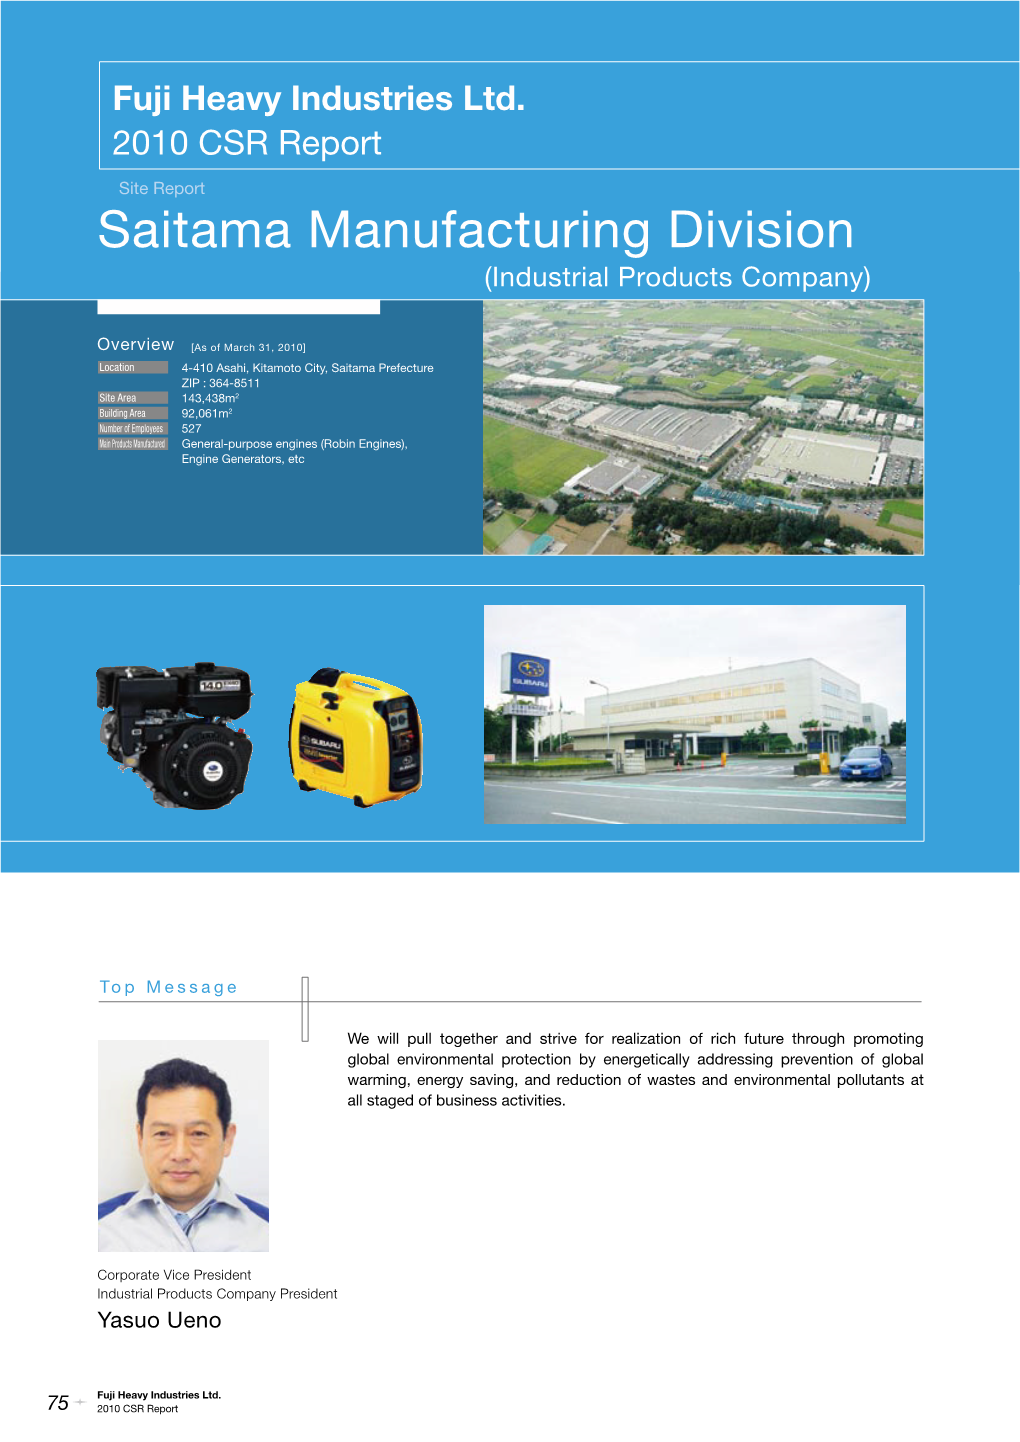 Saitama Manufacturing Division Is the Newest Production Site of SUBARU Which Started Its Operations in 1995